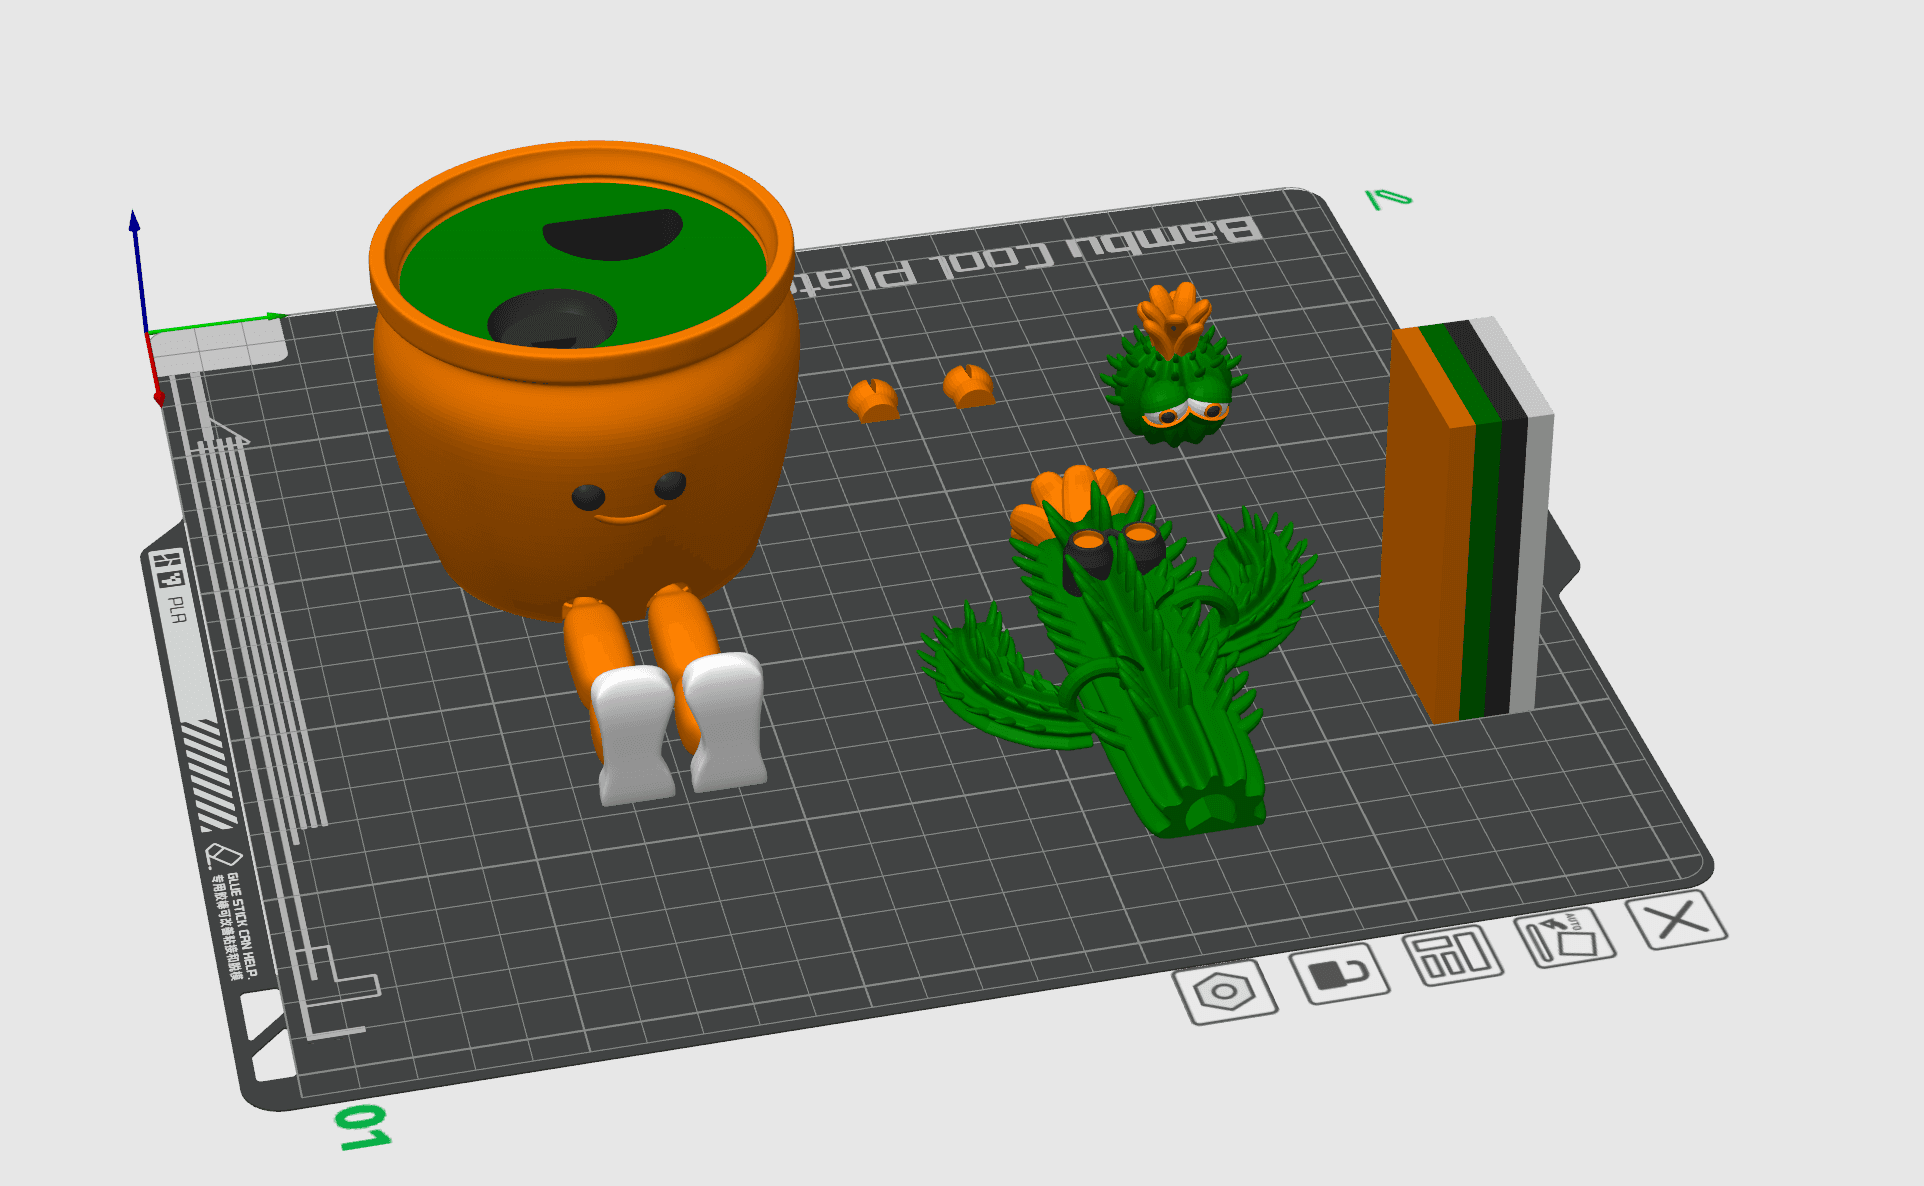 FLEXI POTTED CACTUS (ARTICULATED) PRINT-IN-PLACE LEVER TOYS 3d model